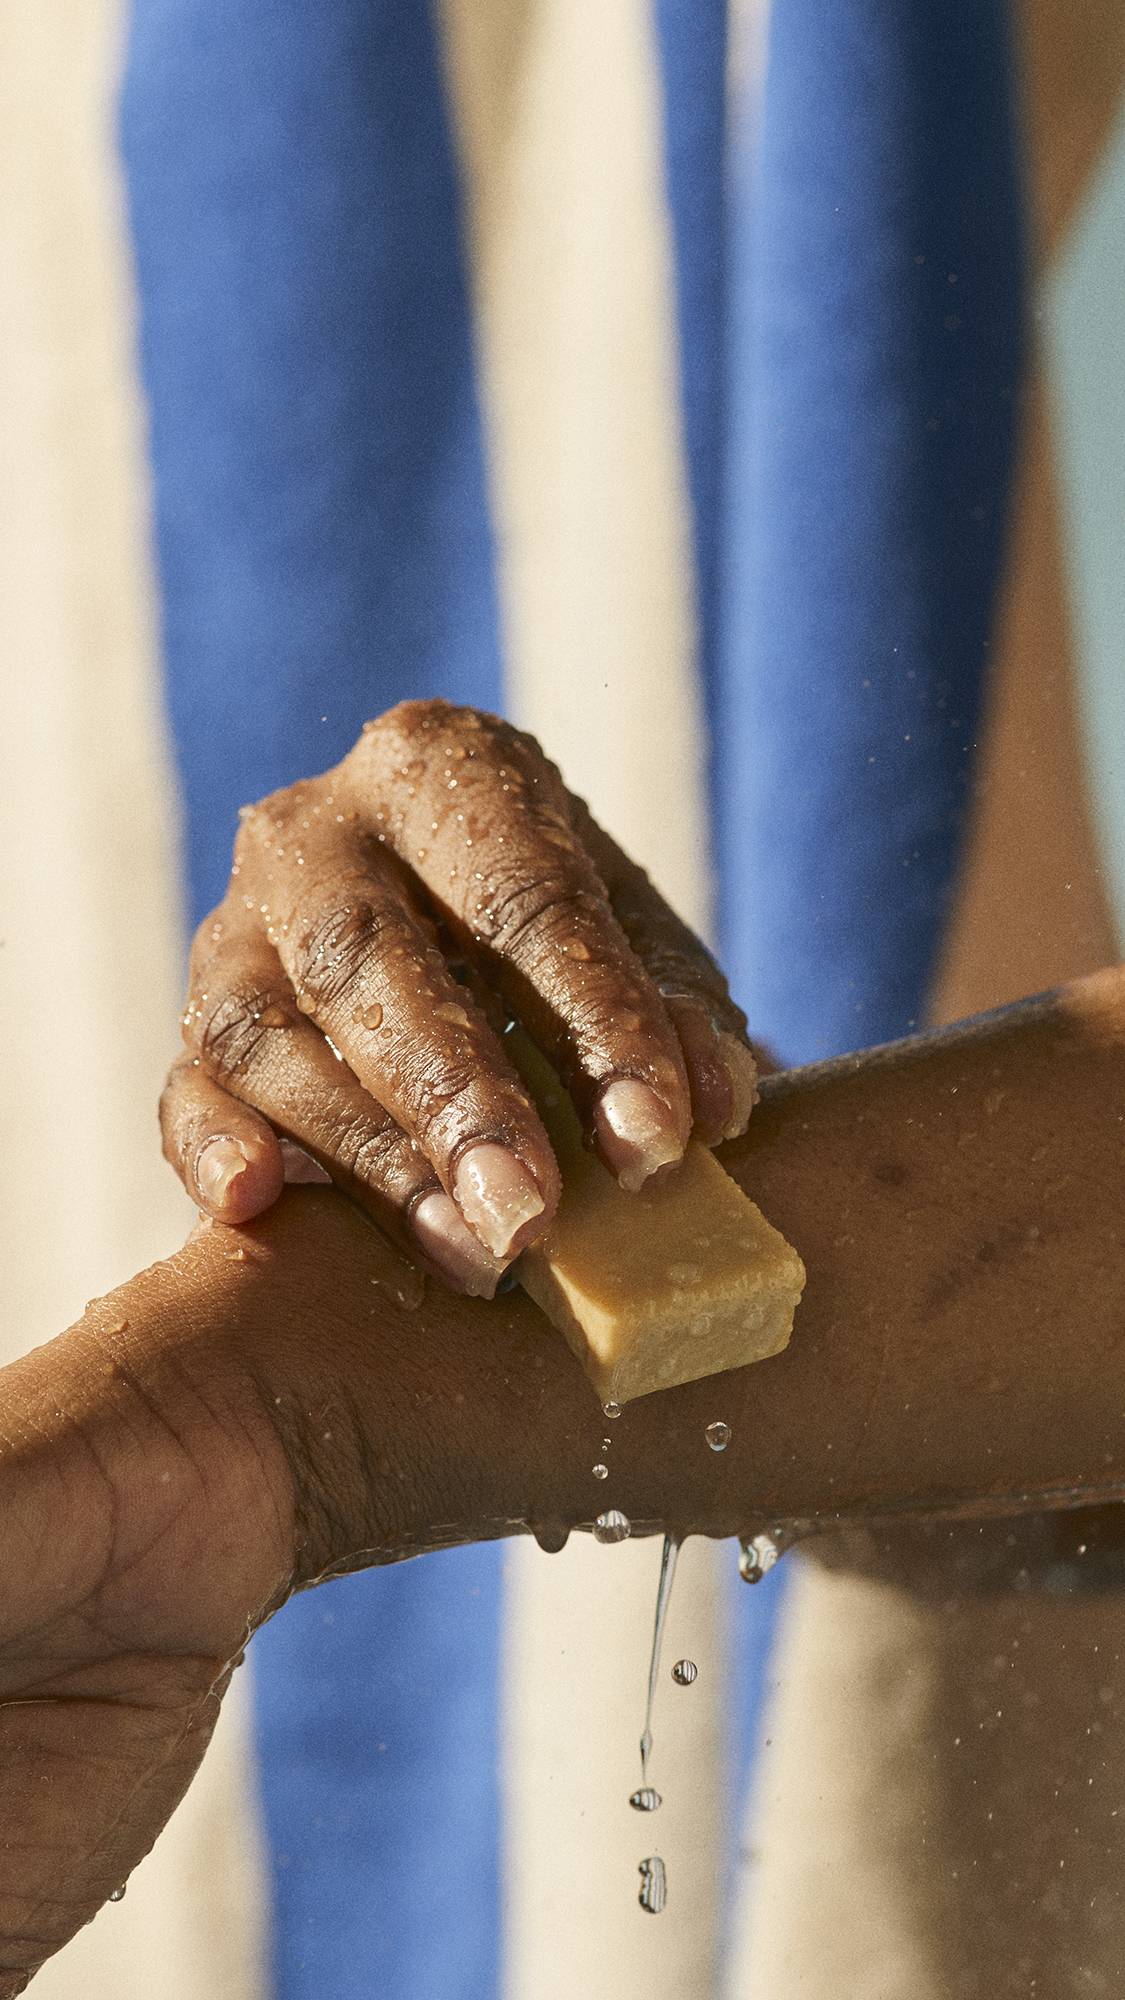 A close-up of the model’s hands and arms as they glide the sunblock over their skin.